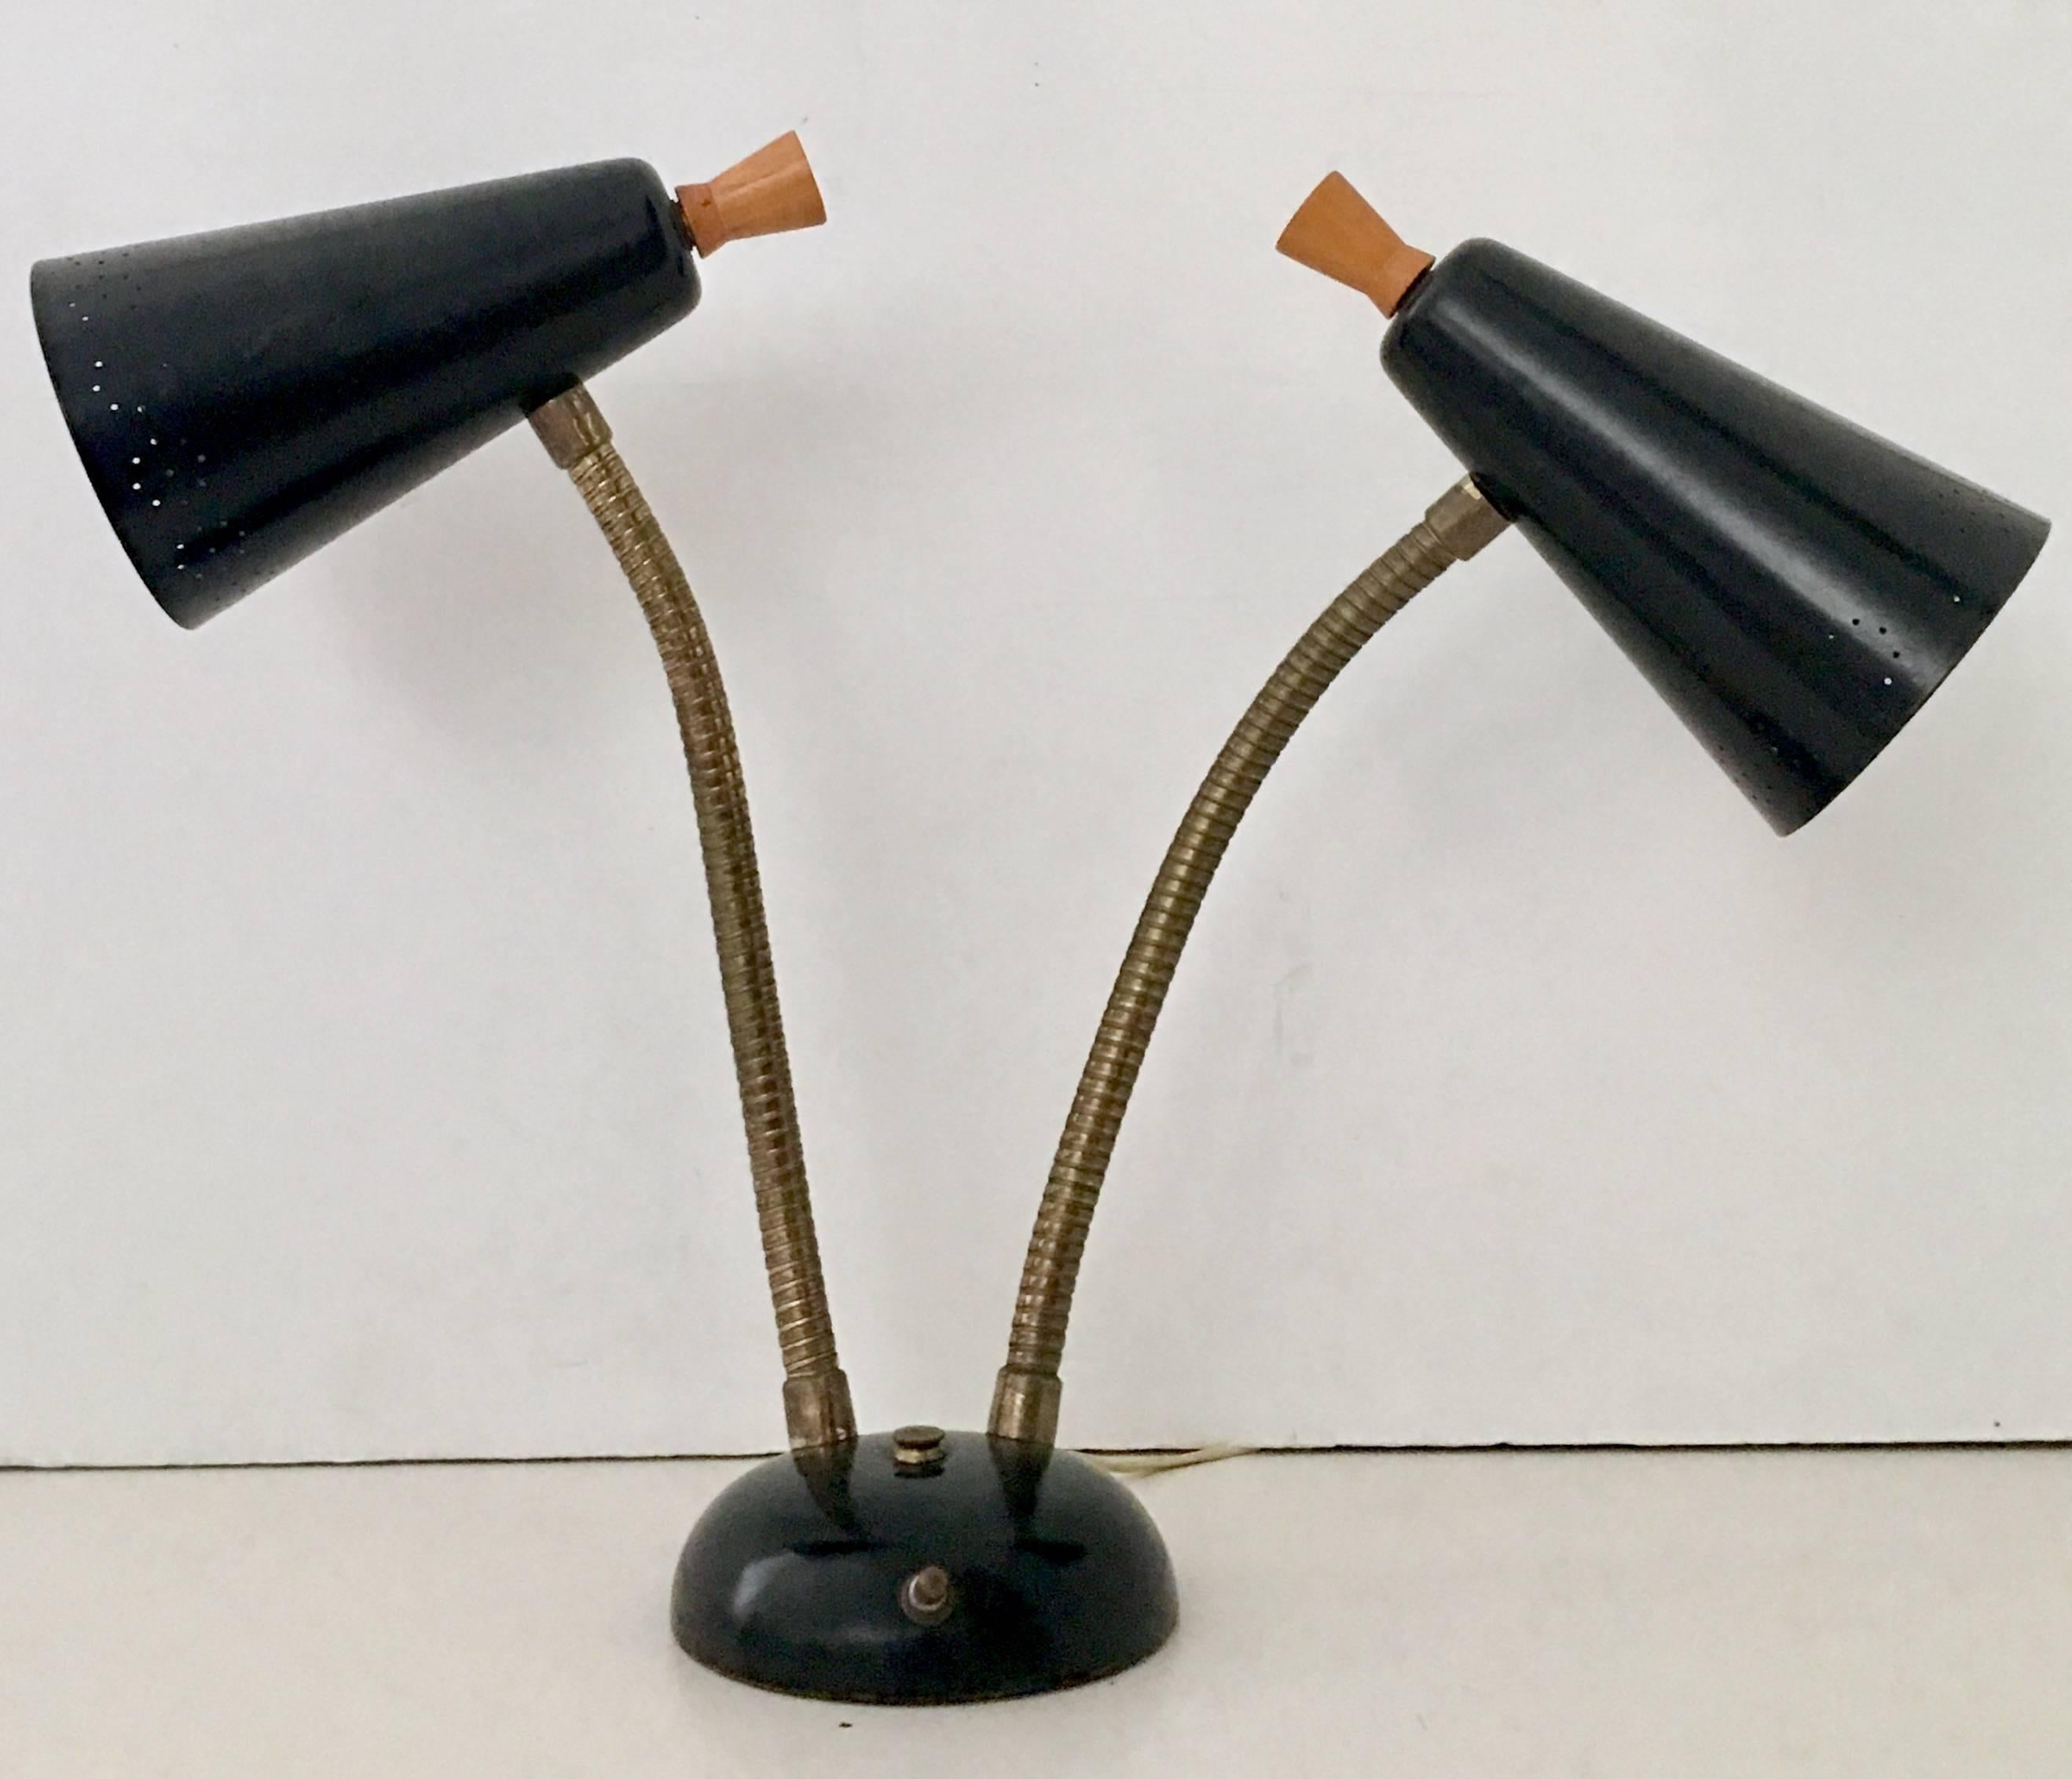 Mid-Century Modern Laurel style double two cone goose neck articulating table lamp. This iconic designed Mid-Century Modern task lamp is fabricated of black enameled metal with two perforated cones, brass fittings and walnut wood knob detail. The